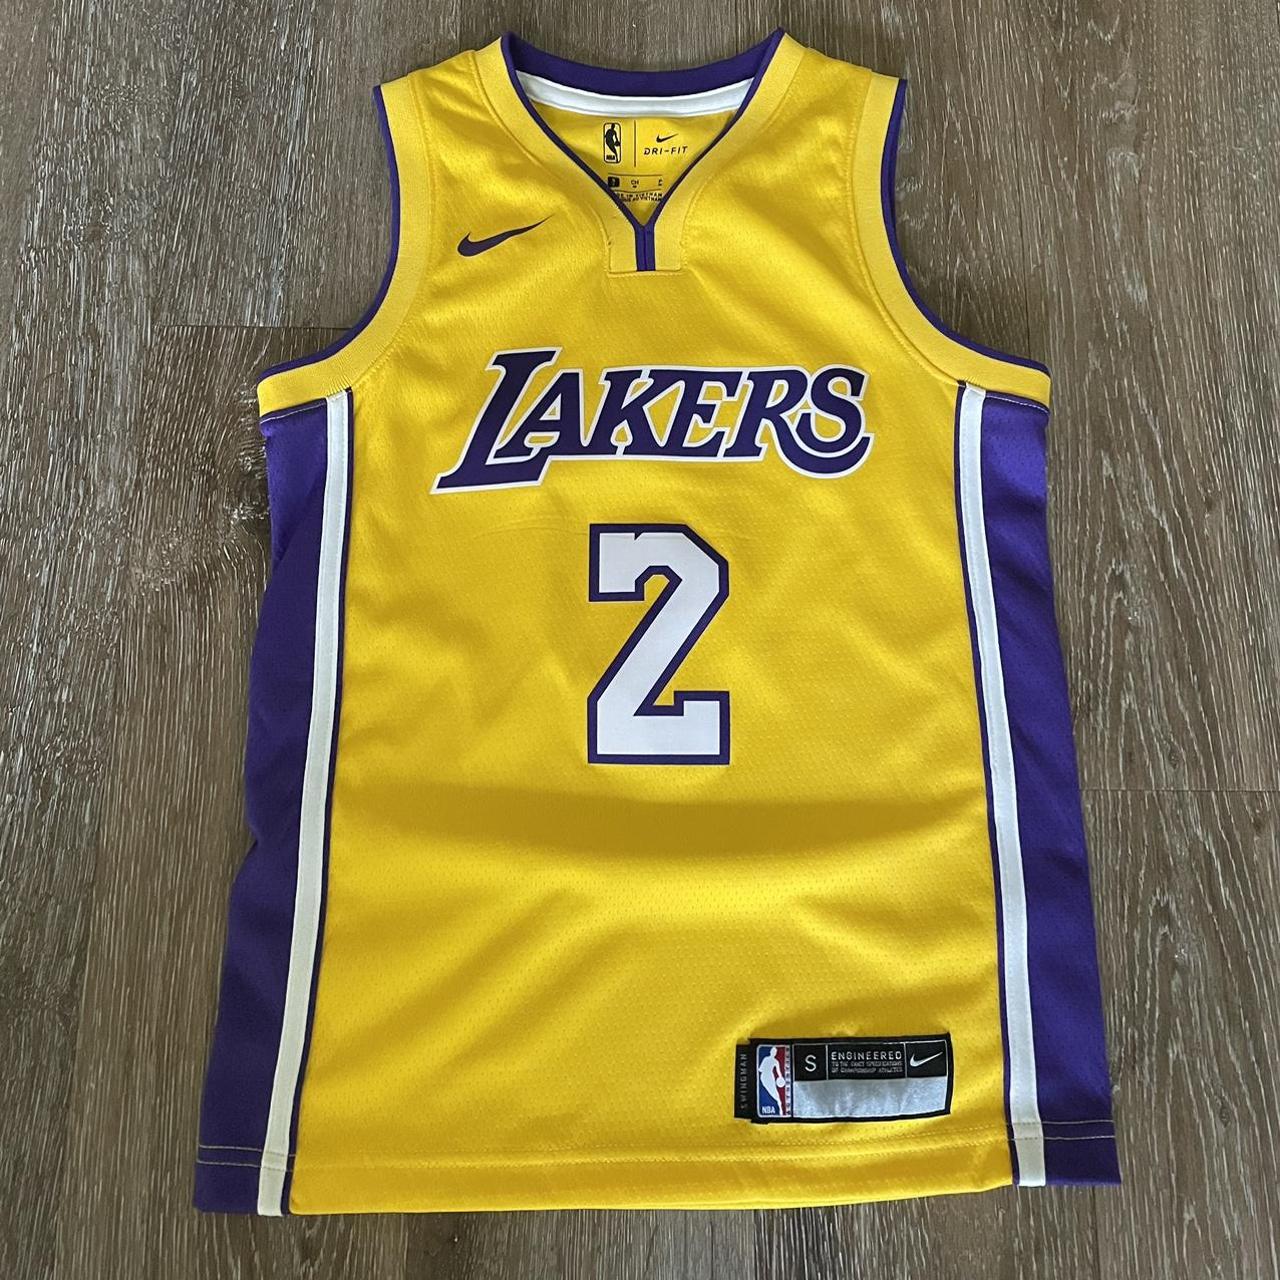 Los Angeles Lakers NBA Jersey Size Small Fits - Depop